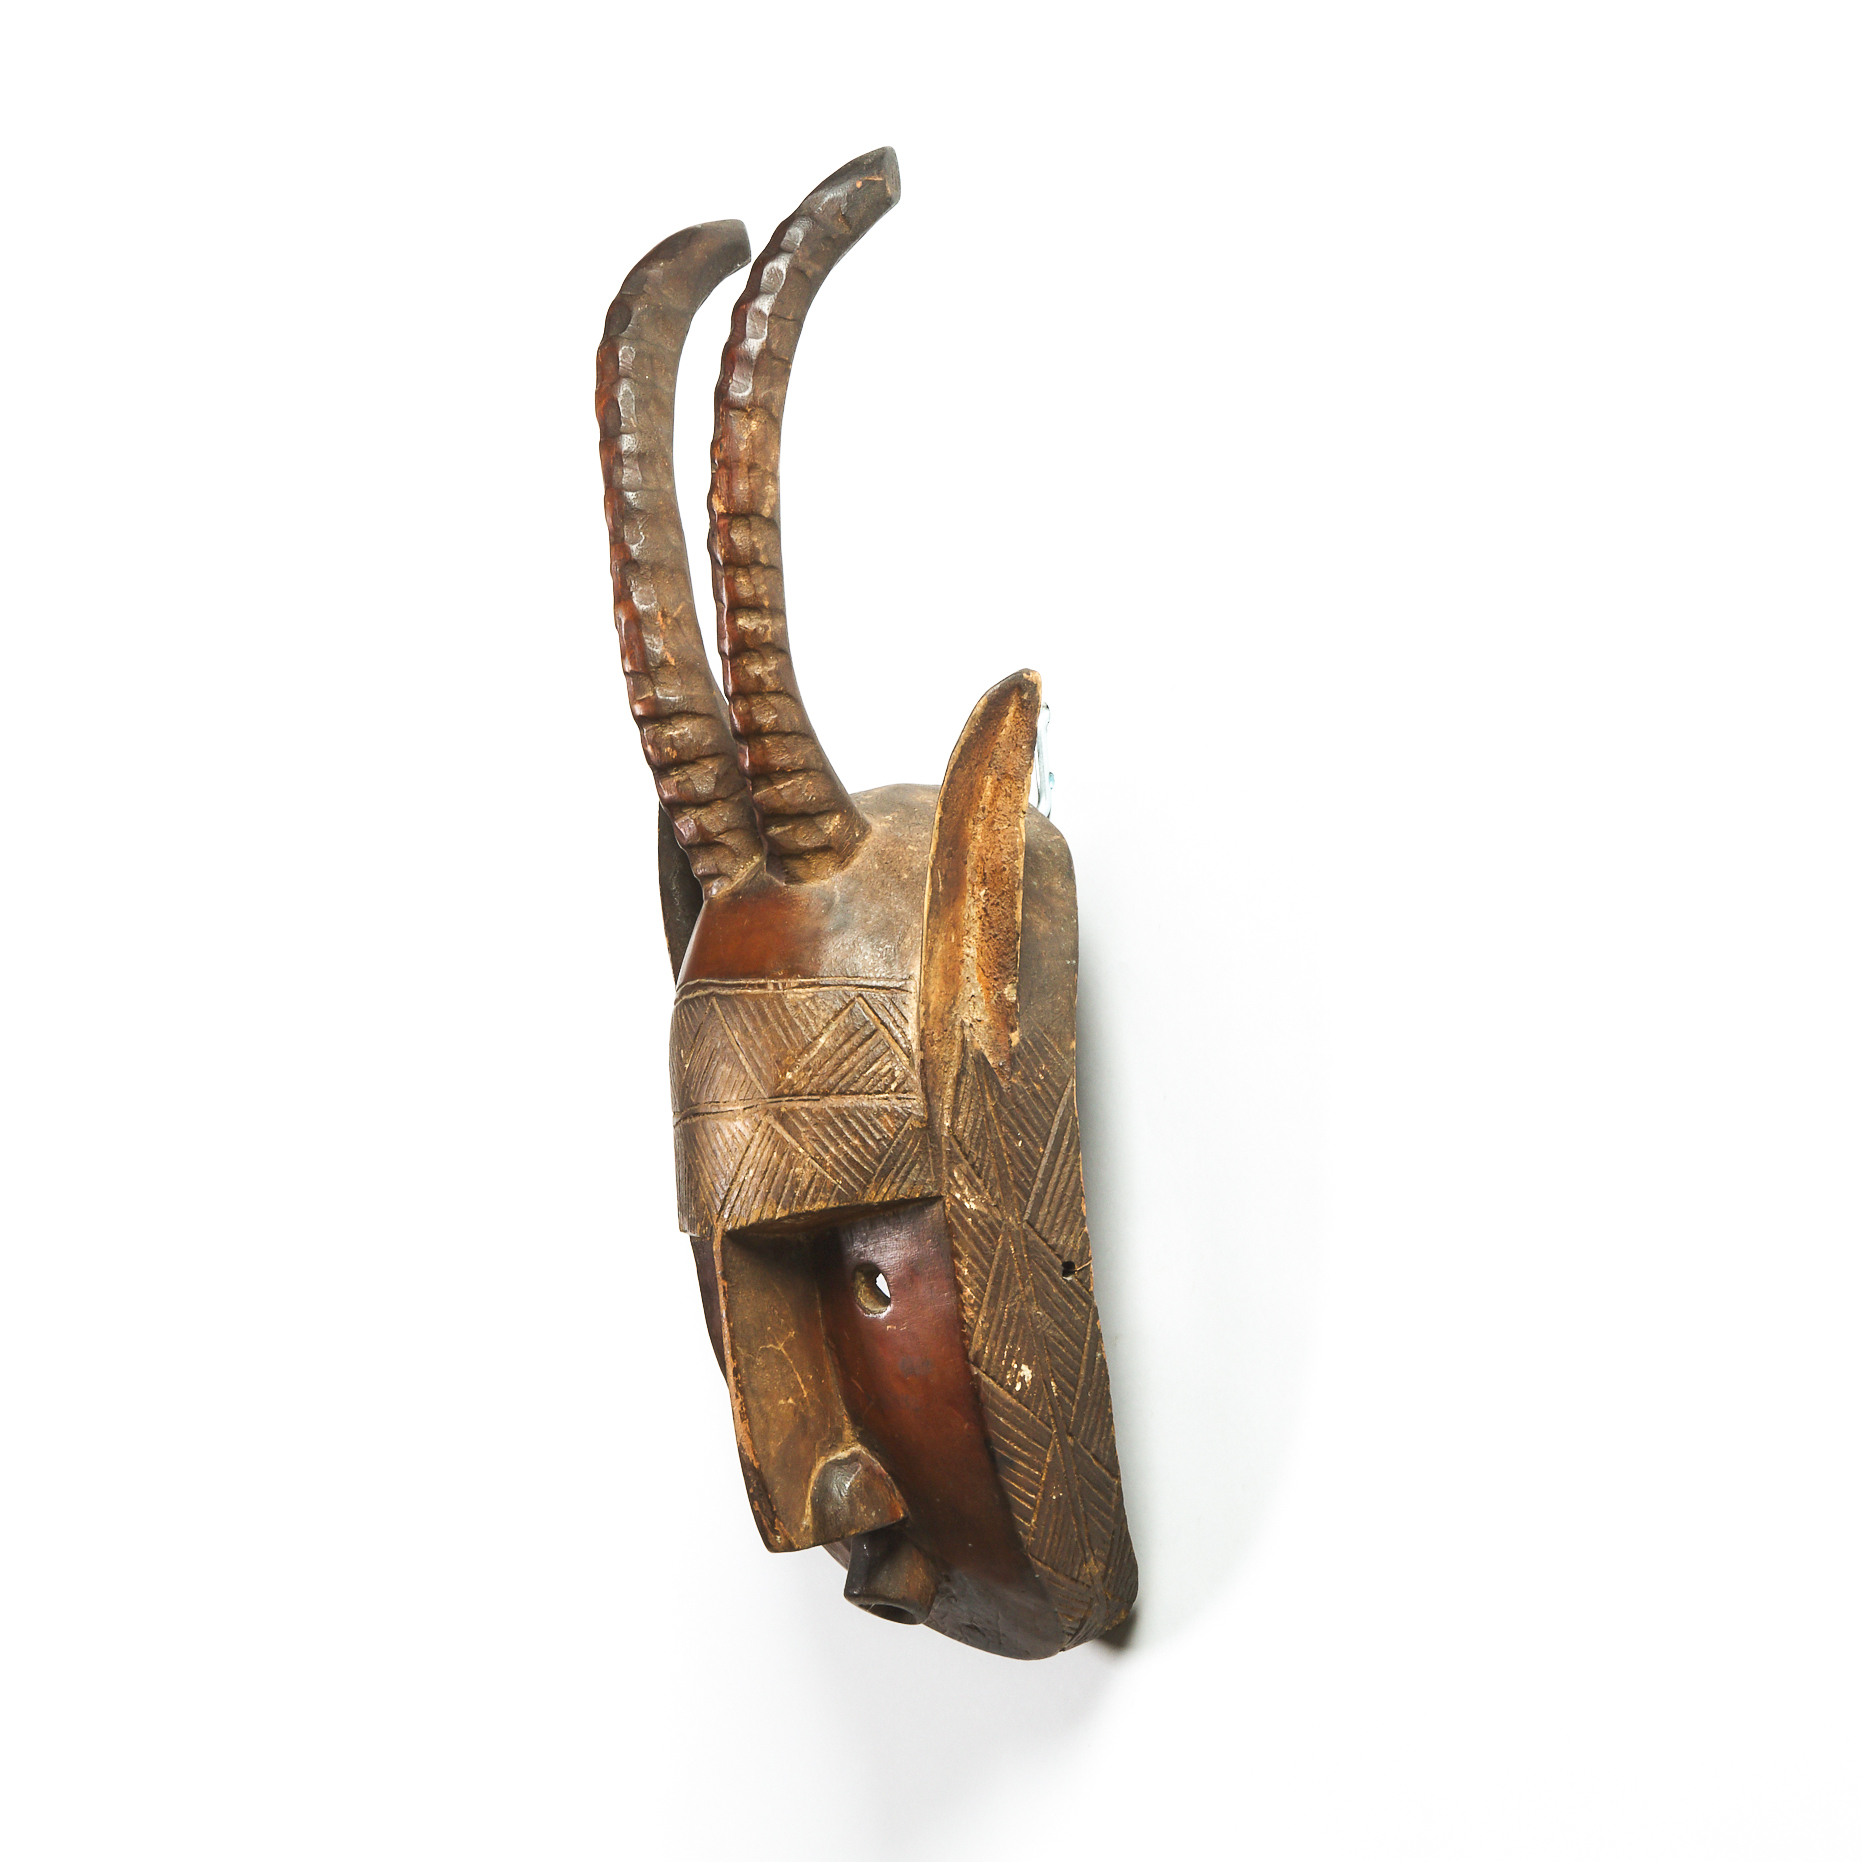 Bamana Mask, Mali, West Africa, mid to late 20th century